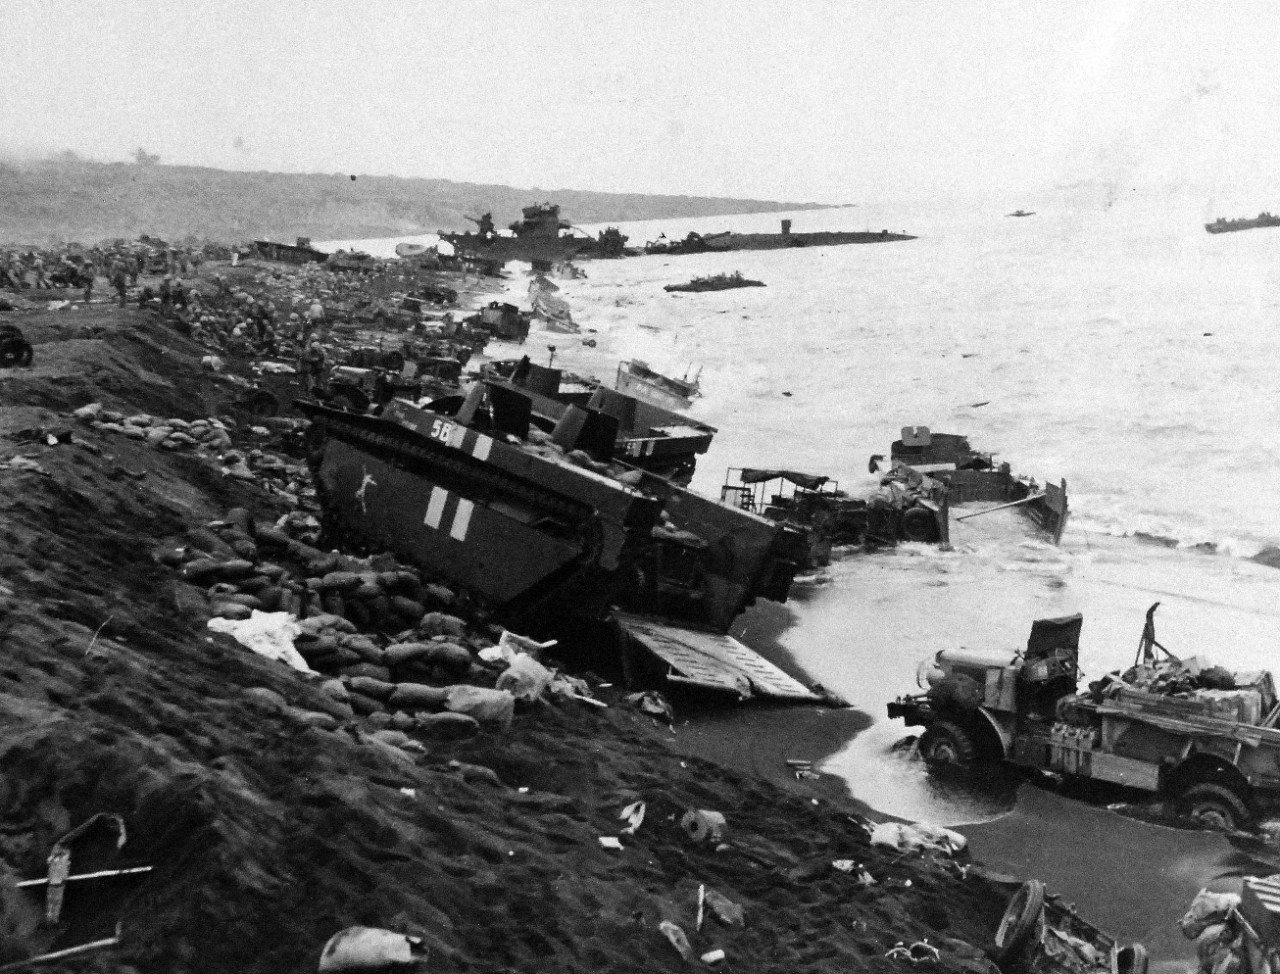 80-G-304851:  Battle for Iwo Jima, February 19, 1945.   Stalled and wrecked vehicles of Marines bagged down in soft Volcanic ash on beach of Iwo Jima were targets for Japanese mortermen who fired down from mountain over-looking beach D-Day.  First Aid stations (background) were set up among the debris.  Official U.S. Navy Photograph now in the collections of the National Archives.  (2016/01/19).